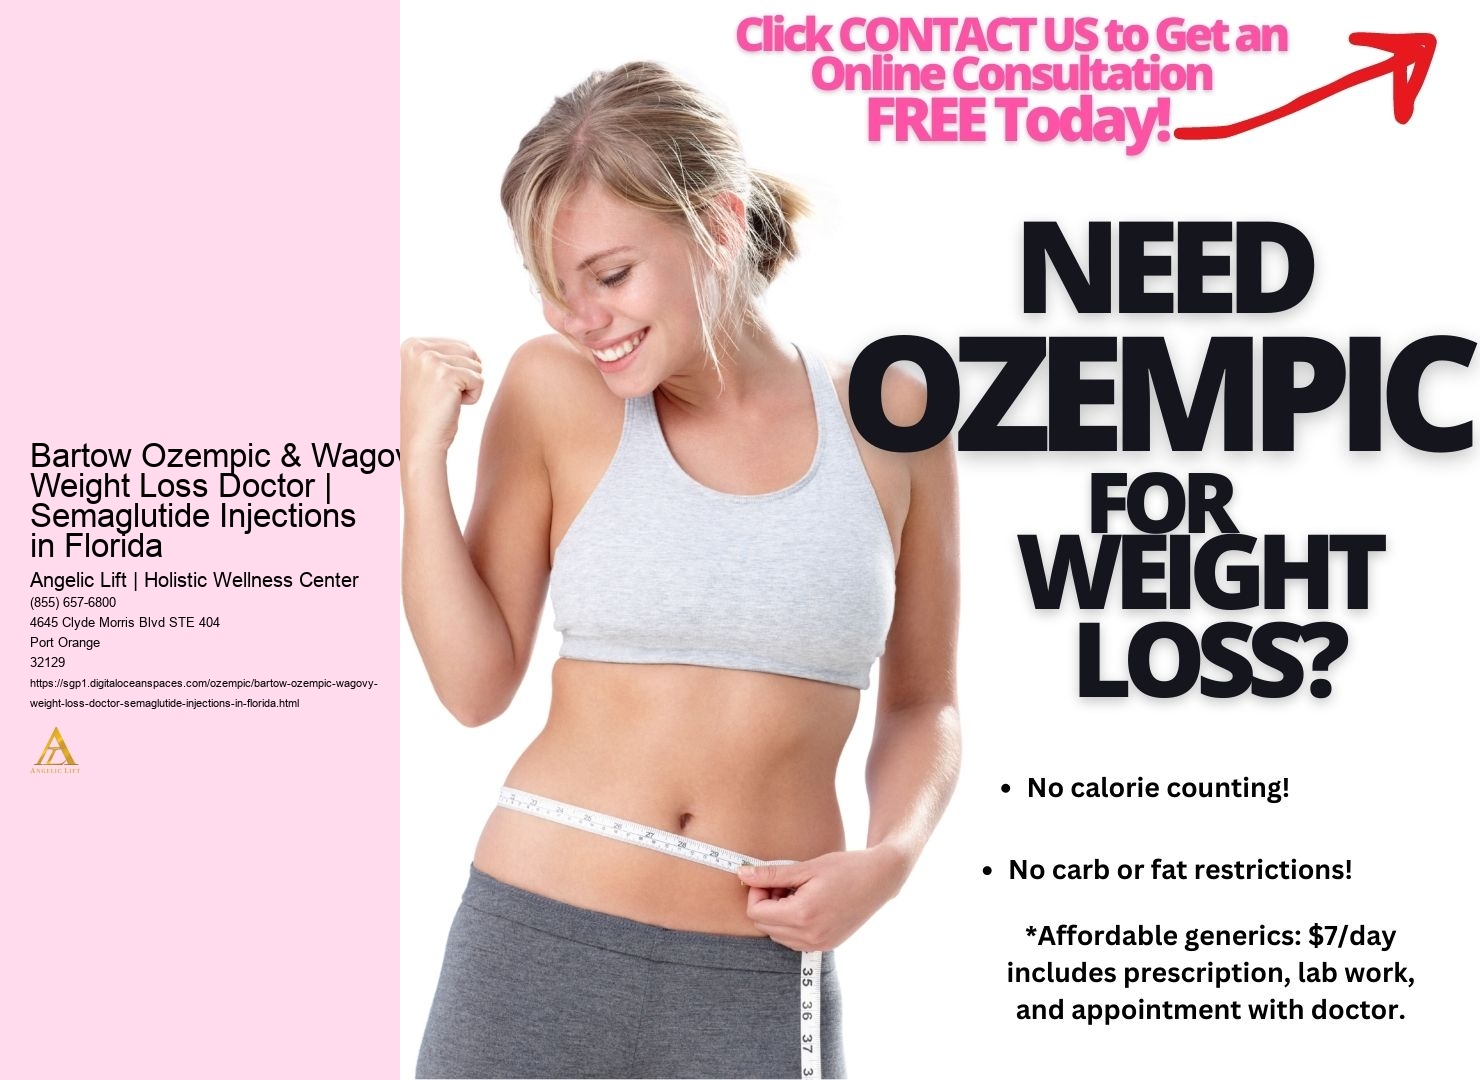 Bartow Ozempic & Wagovy Weight Loss Doctor | Semaglutide Injections in Florida